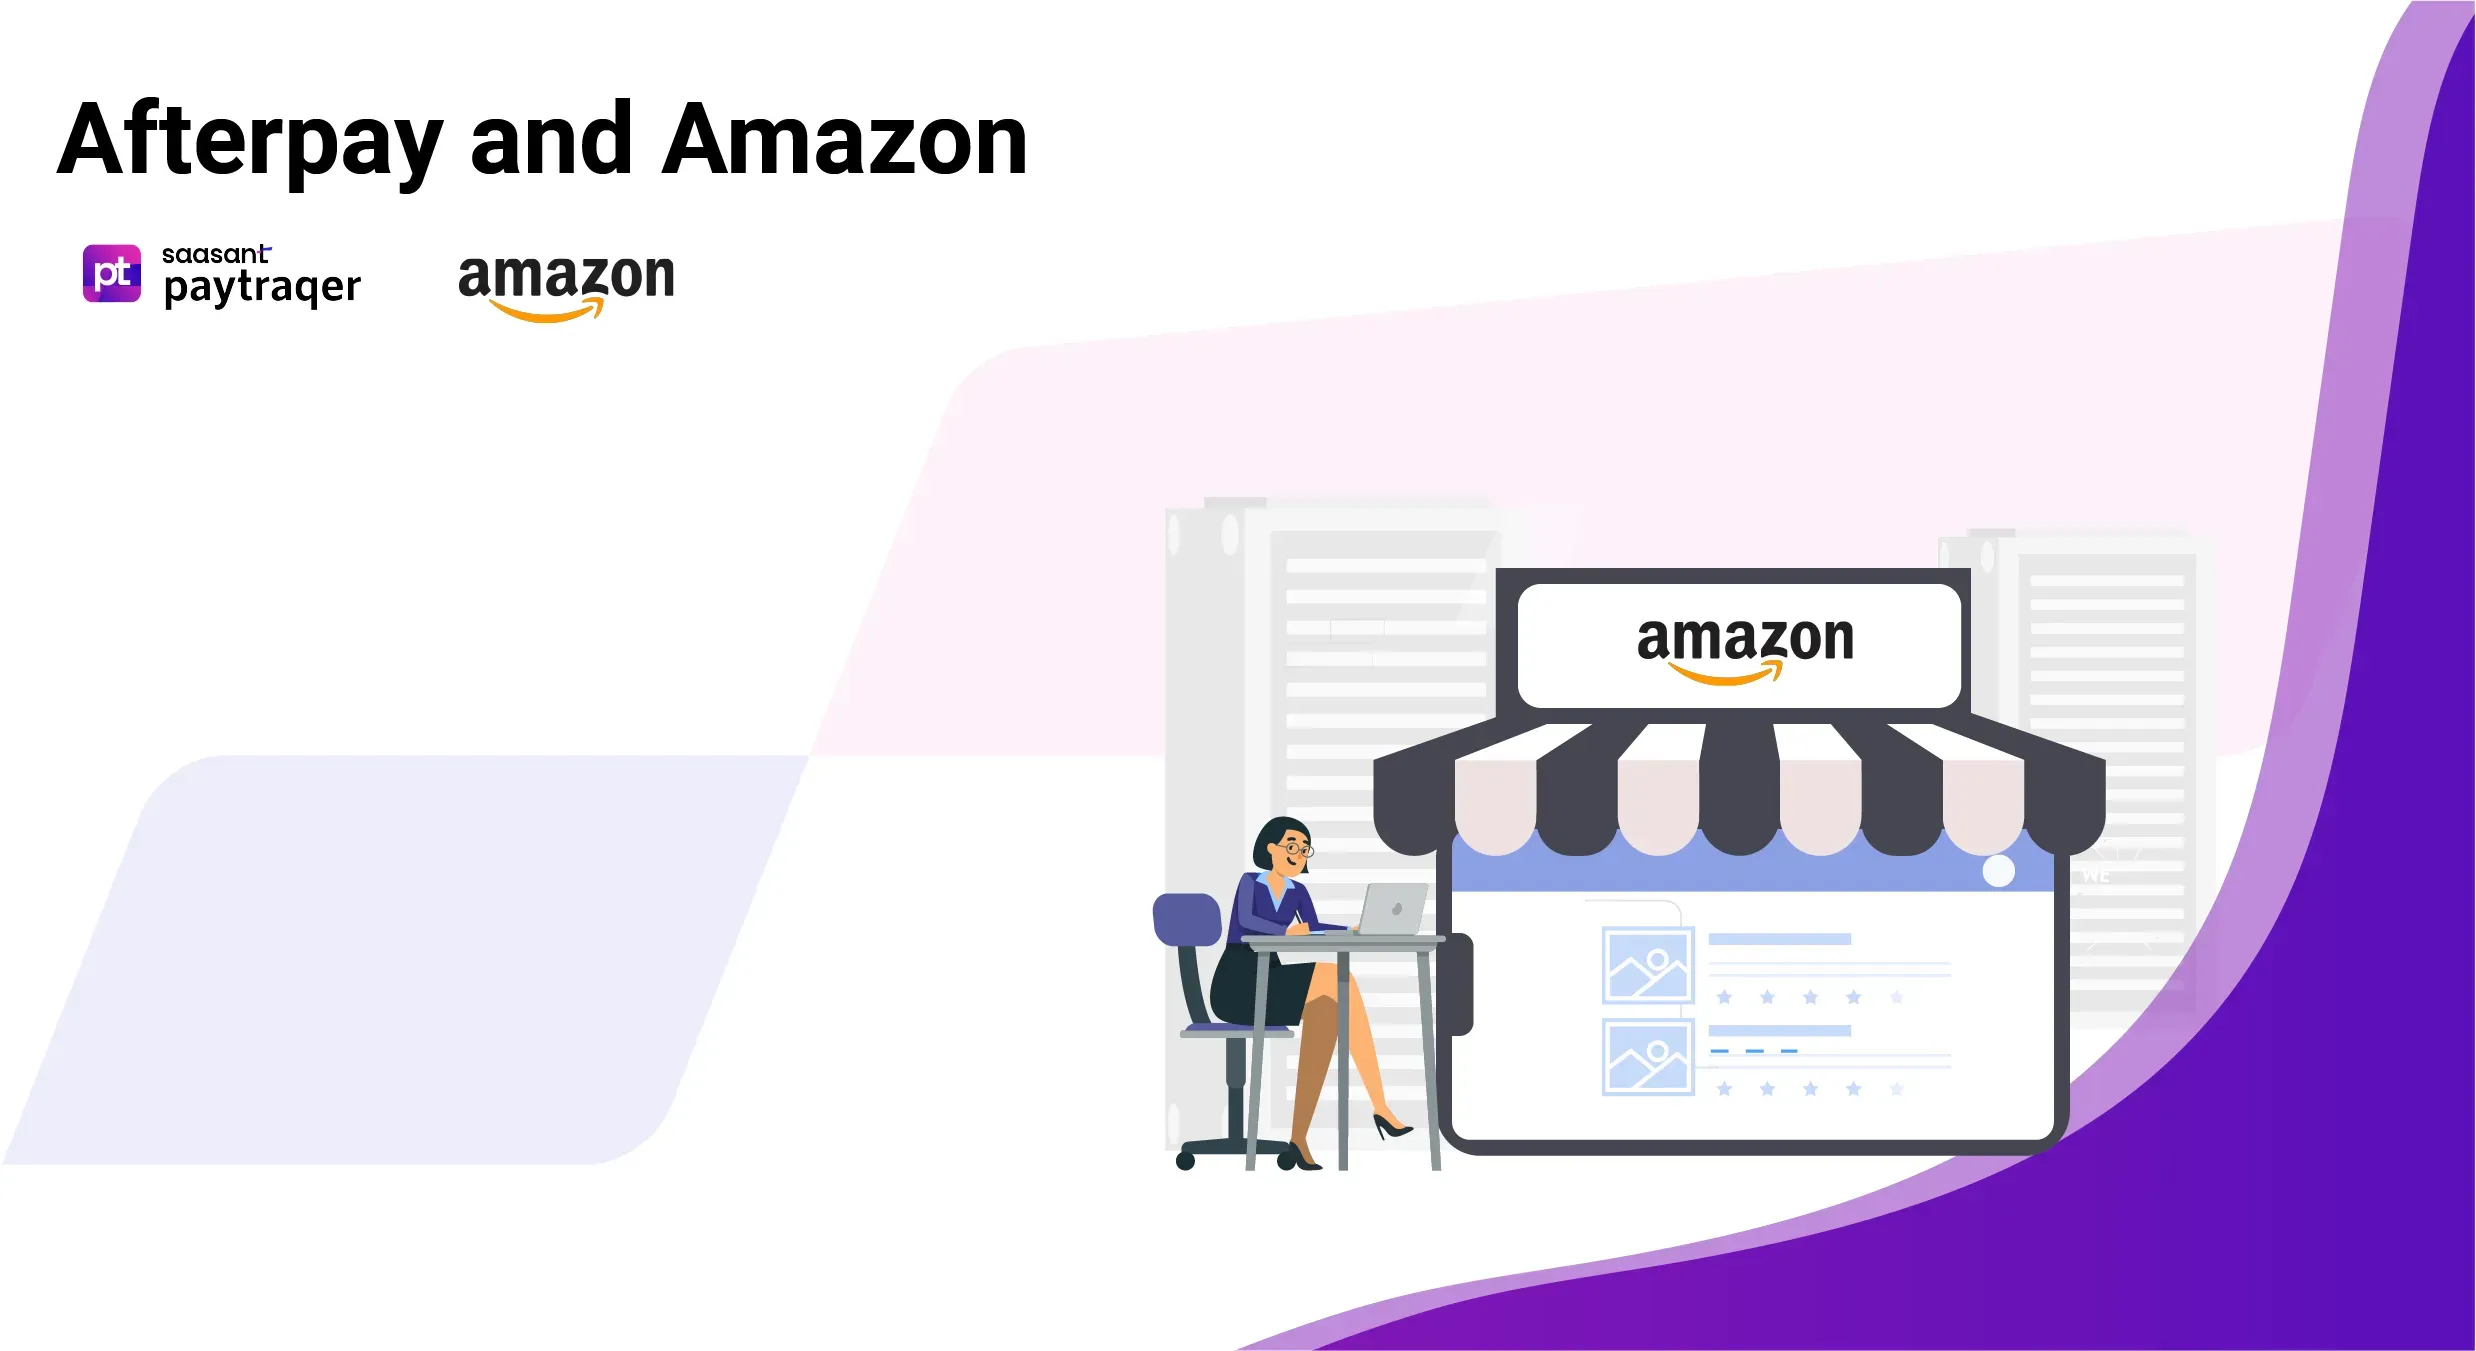 Afterpay and Amazon